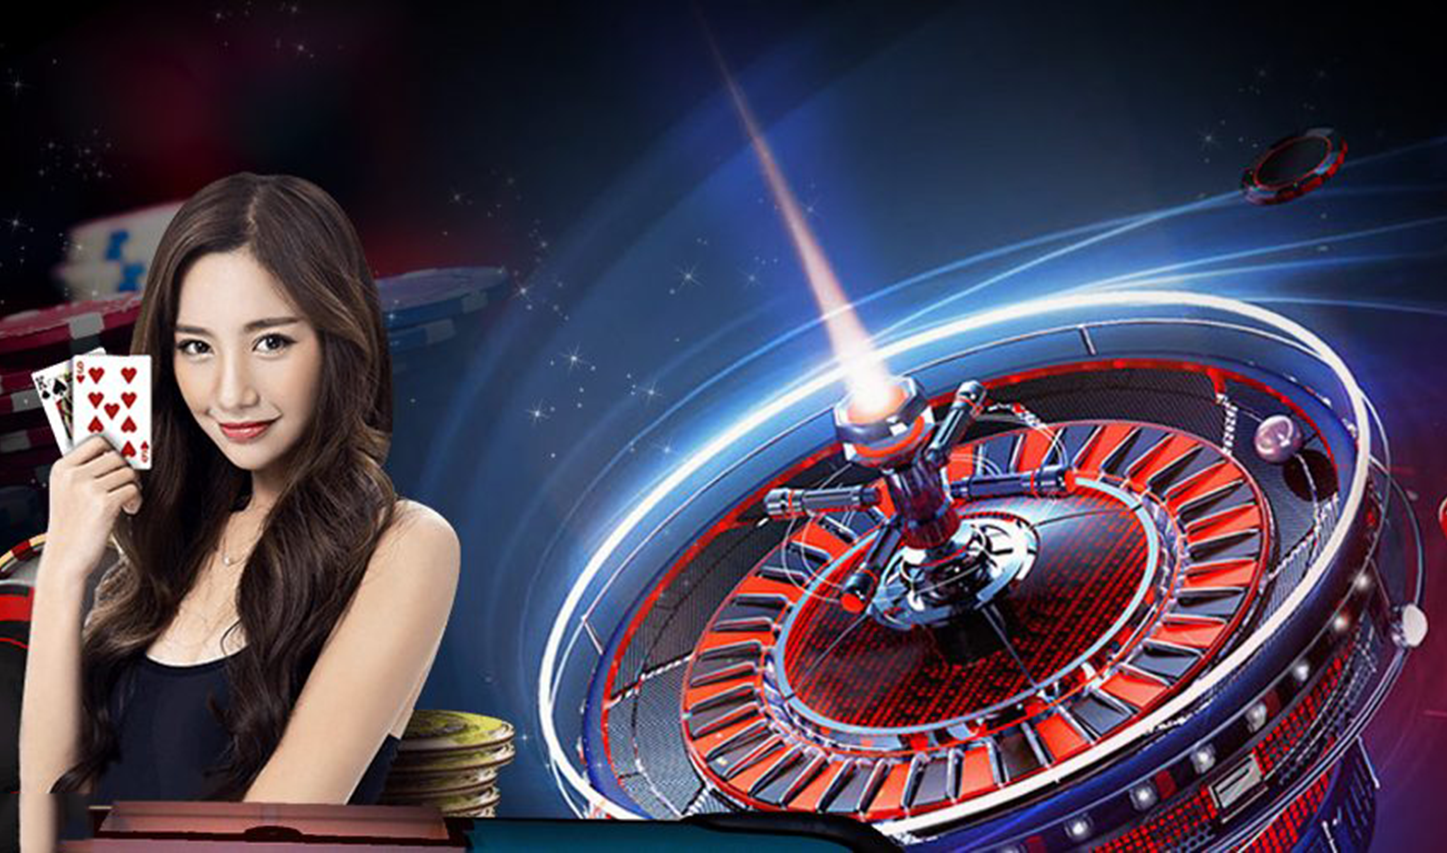 online casino malaysia reviews post